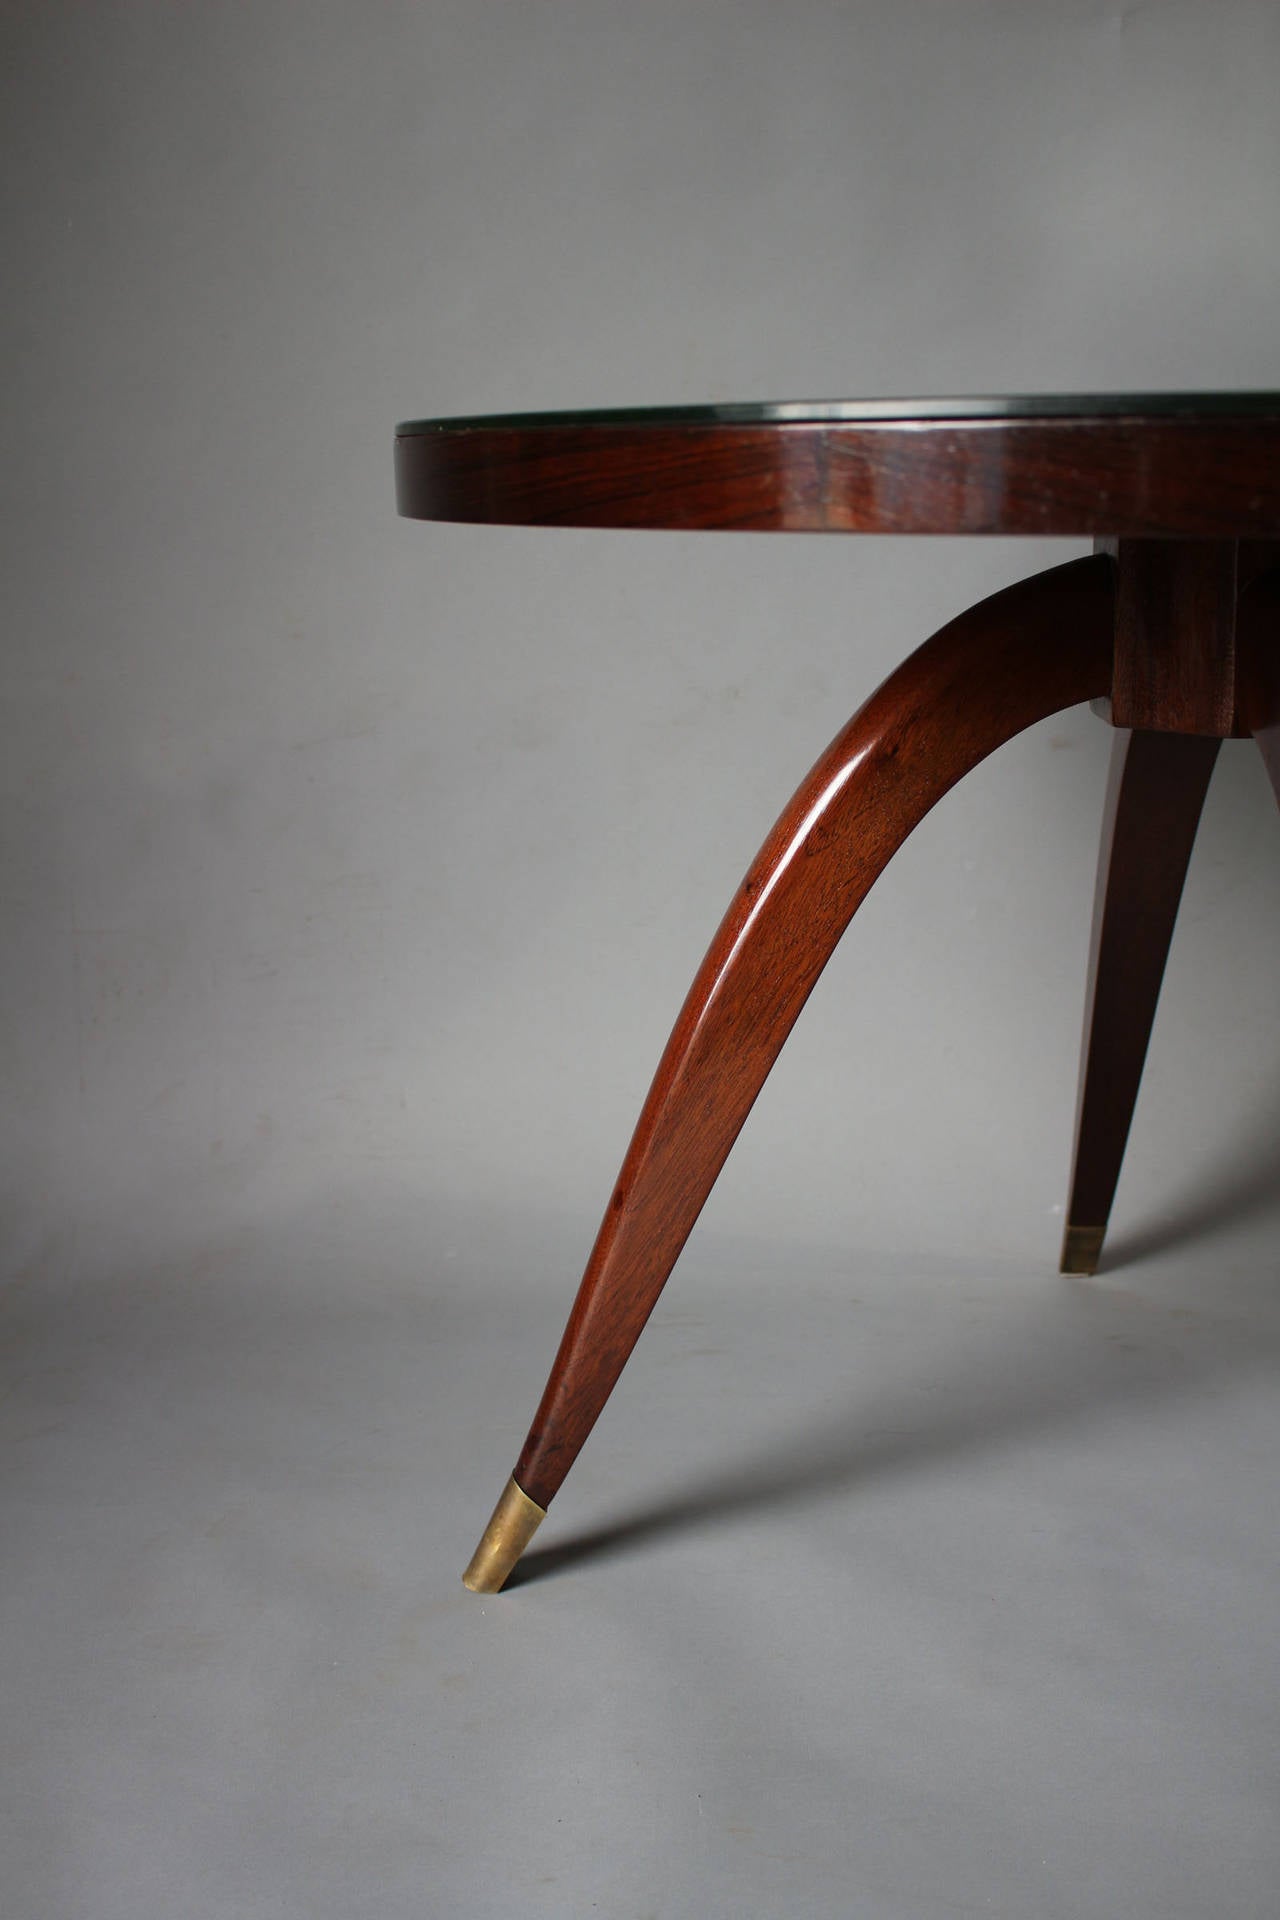 Fine French Art Deco Mahogany Gueridon with an ÉGlomisé Glass Top For Sale 4